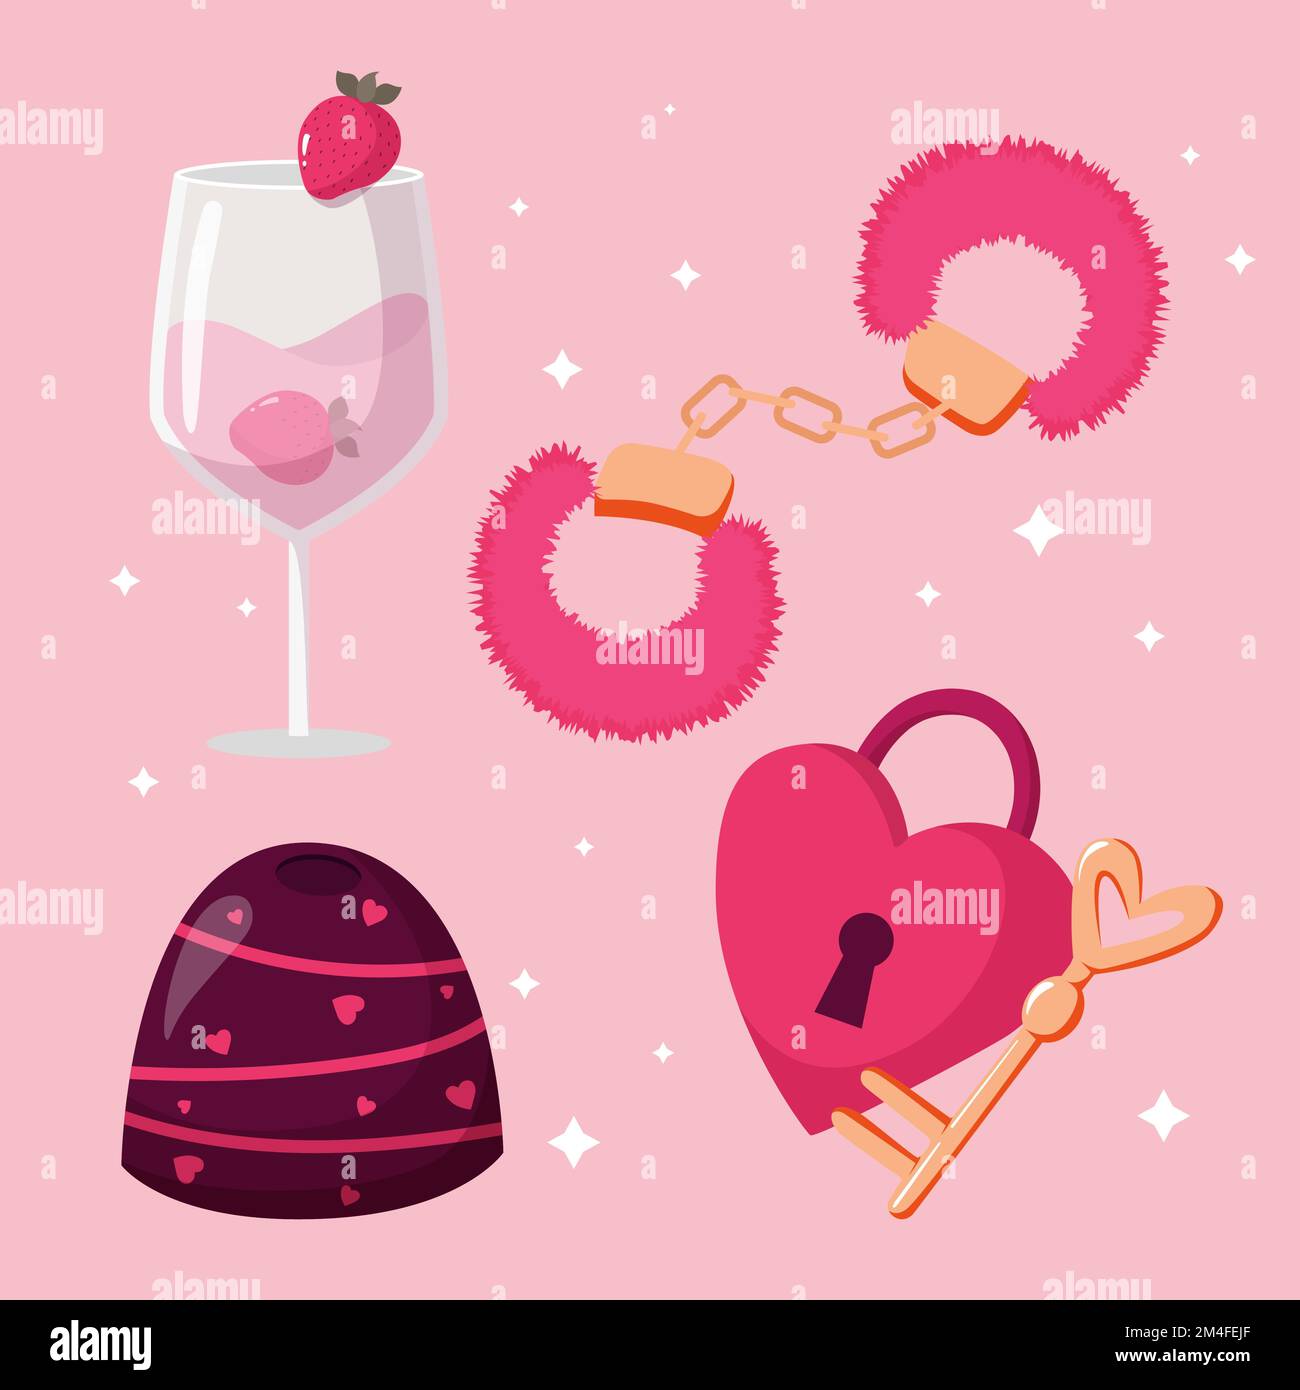 cute cartoon valentines day elements pink fur handcuffs heart lock and key wine glass with cupcake and chocolate candy Stock Vector